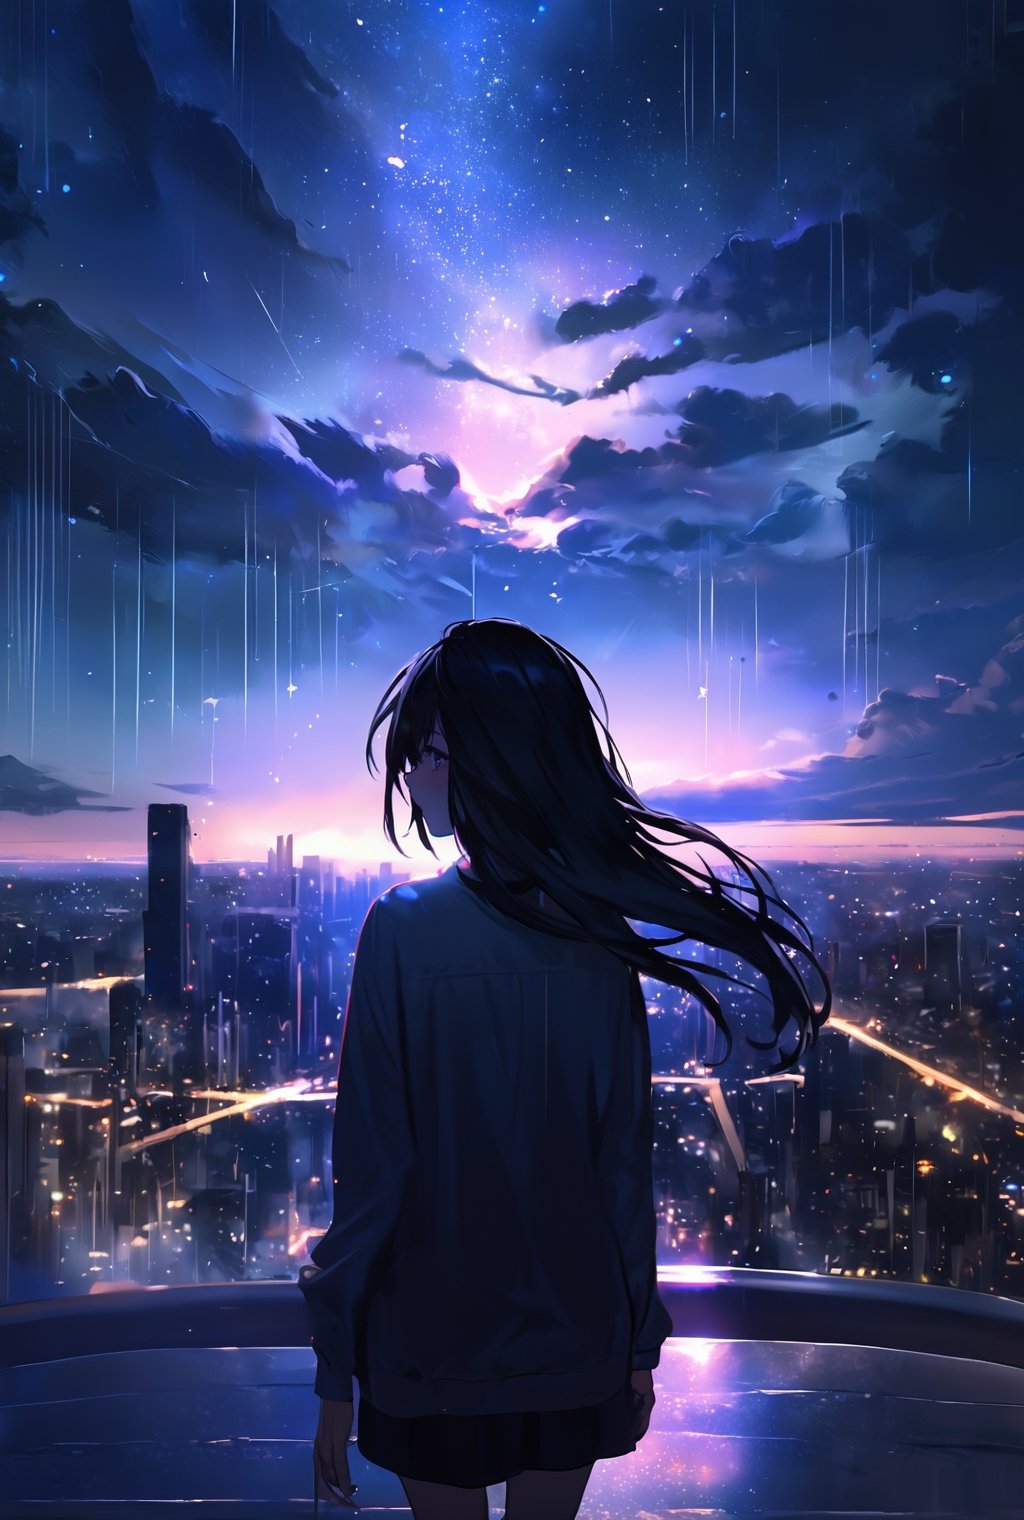 The scene is endlessly beautiful evening darkness transformed into a deep and enchanting night sky, adding a profound beauty to the composition. Looking up at this enchanting vast sky is a woman with beautiful long black hair seen from behind. The city is beautifully illuminated and reflective after the rain. The cartoon-like image retains the ultra-high definition and delicate detail, while the realism and HDR effects bring out the beauty of the evening sky and the vast, beautiful city.

Emphasizes the quality and style of "Hasselblad 500C/M" photography, with an emphasis on capturing the subtle details of her direct view and casual attire in natural outdoor lighting.